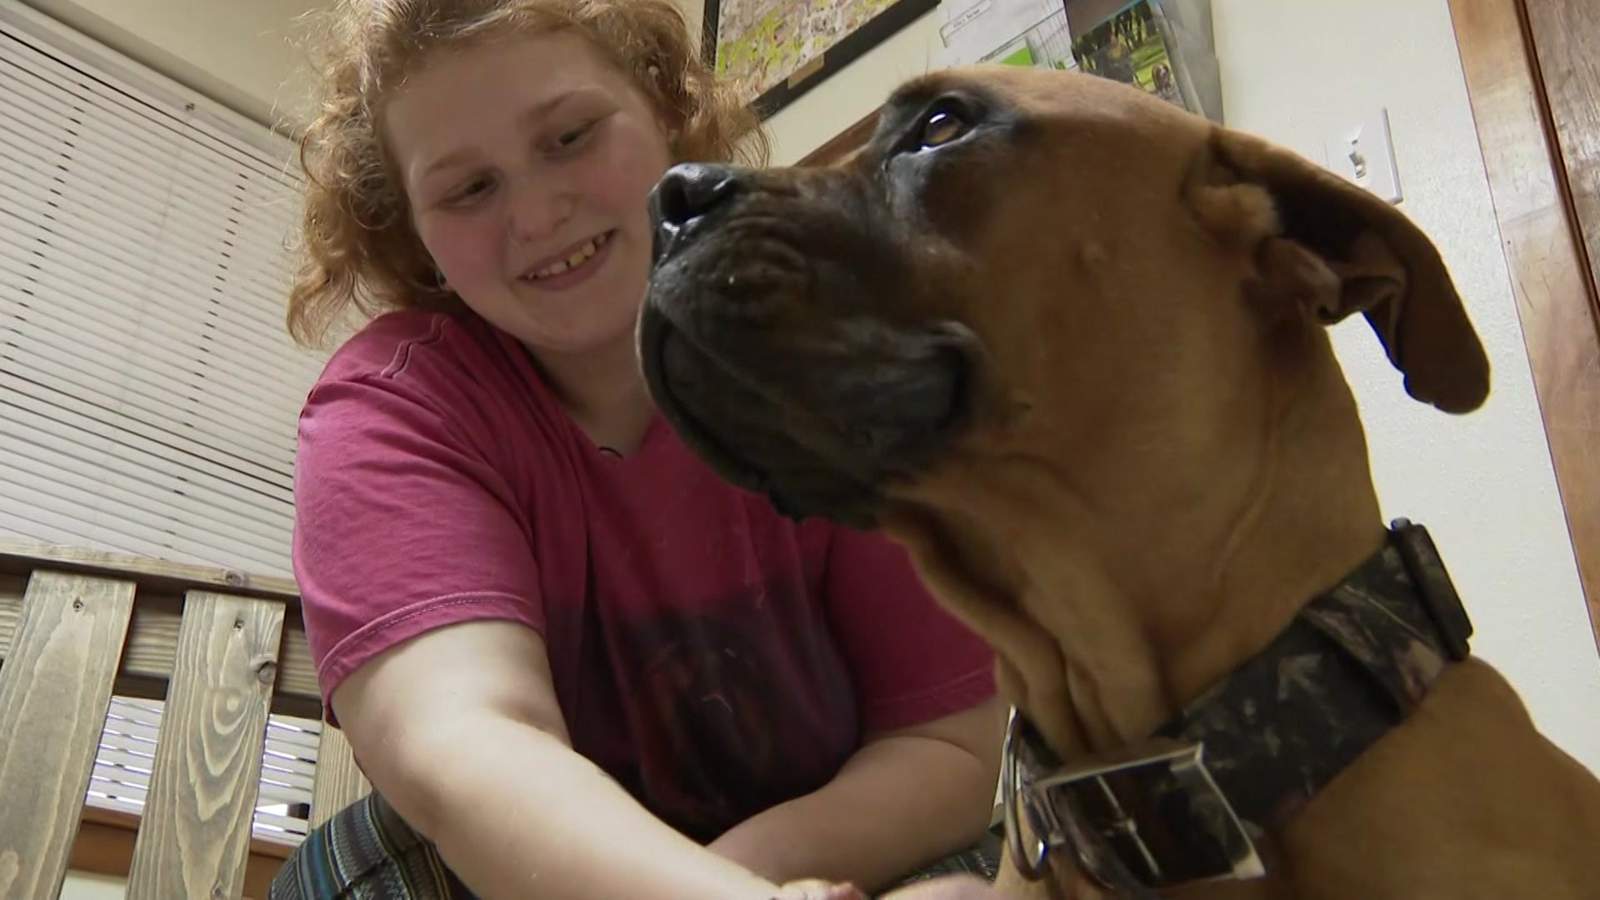 Emergency surgery saves dog’s life after it eats fork, Cleveland family says